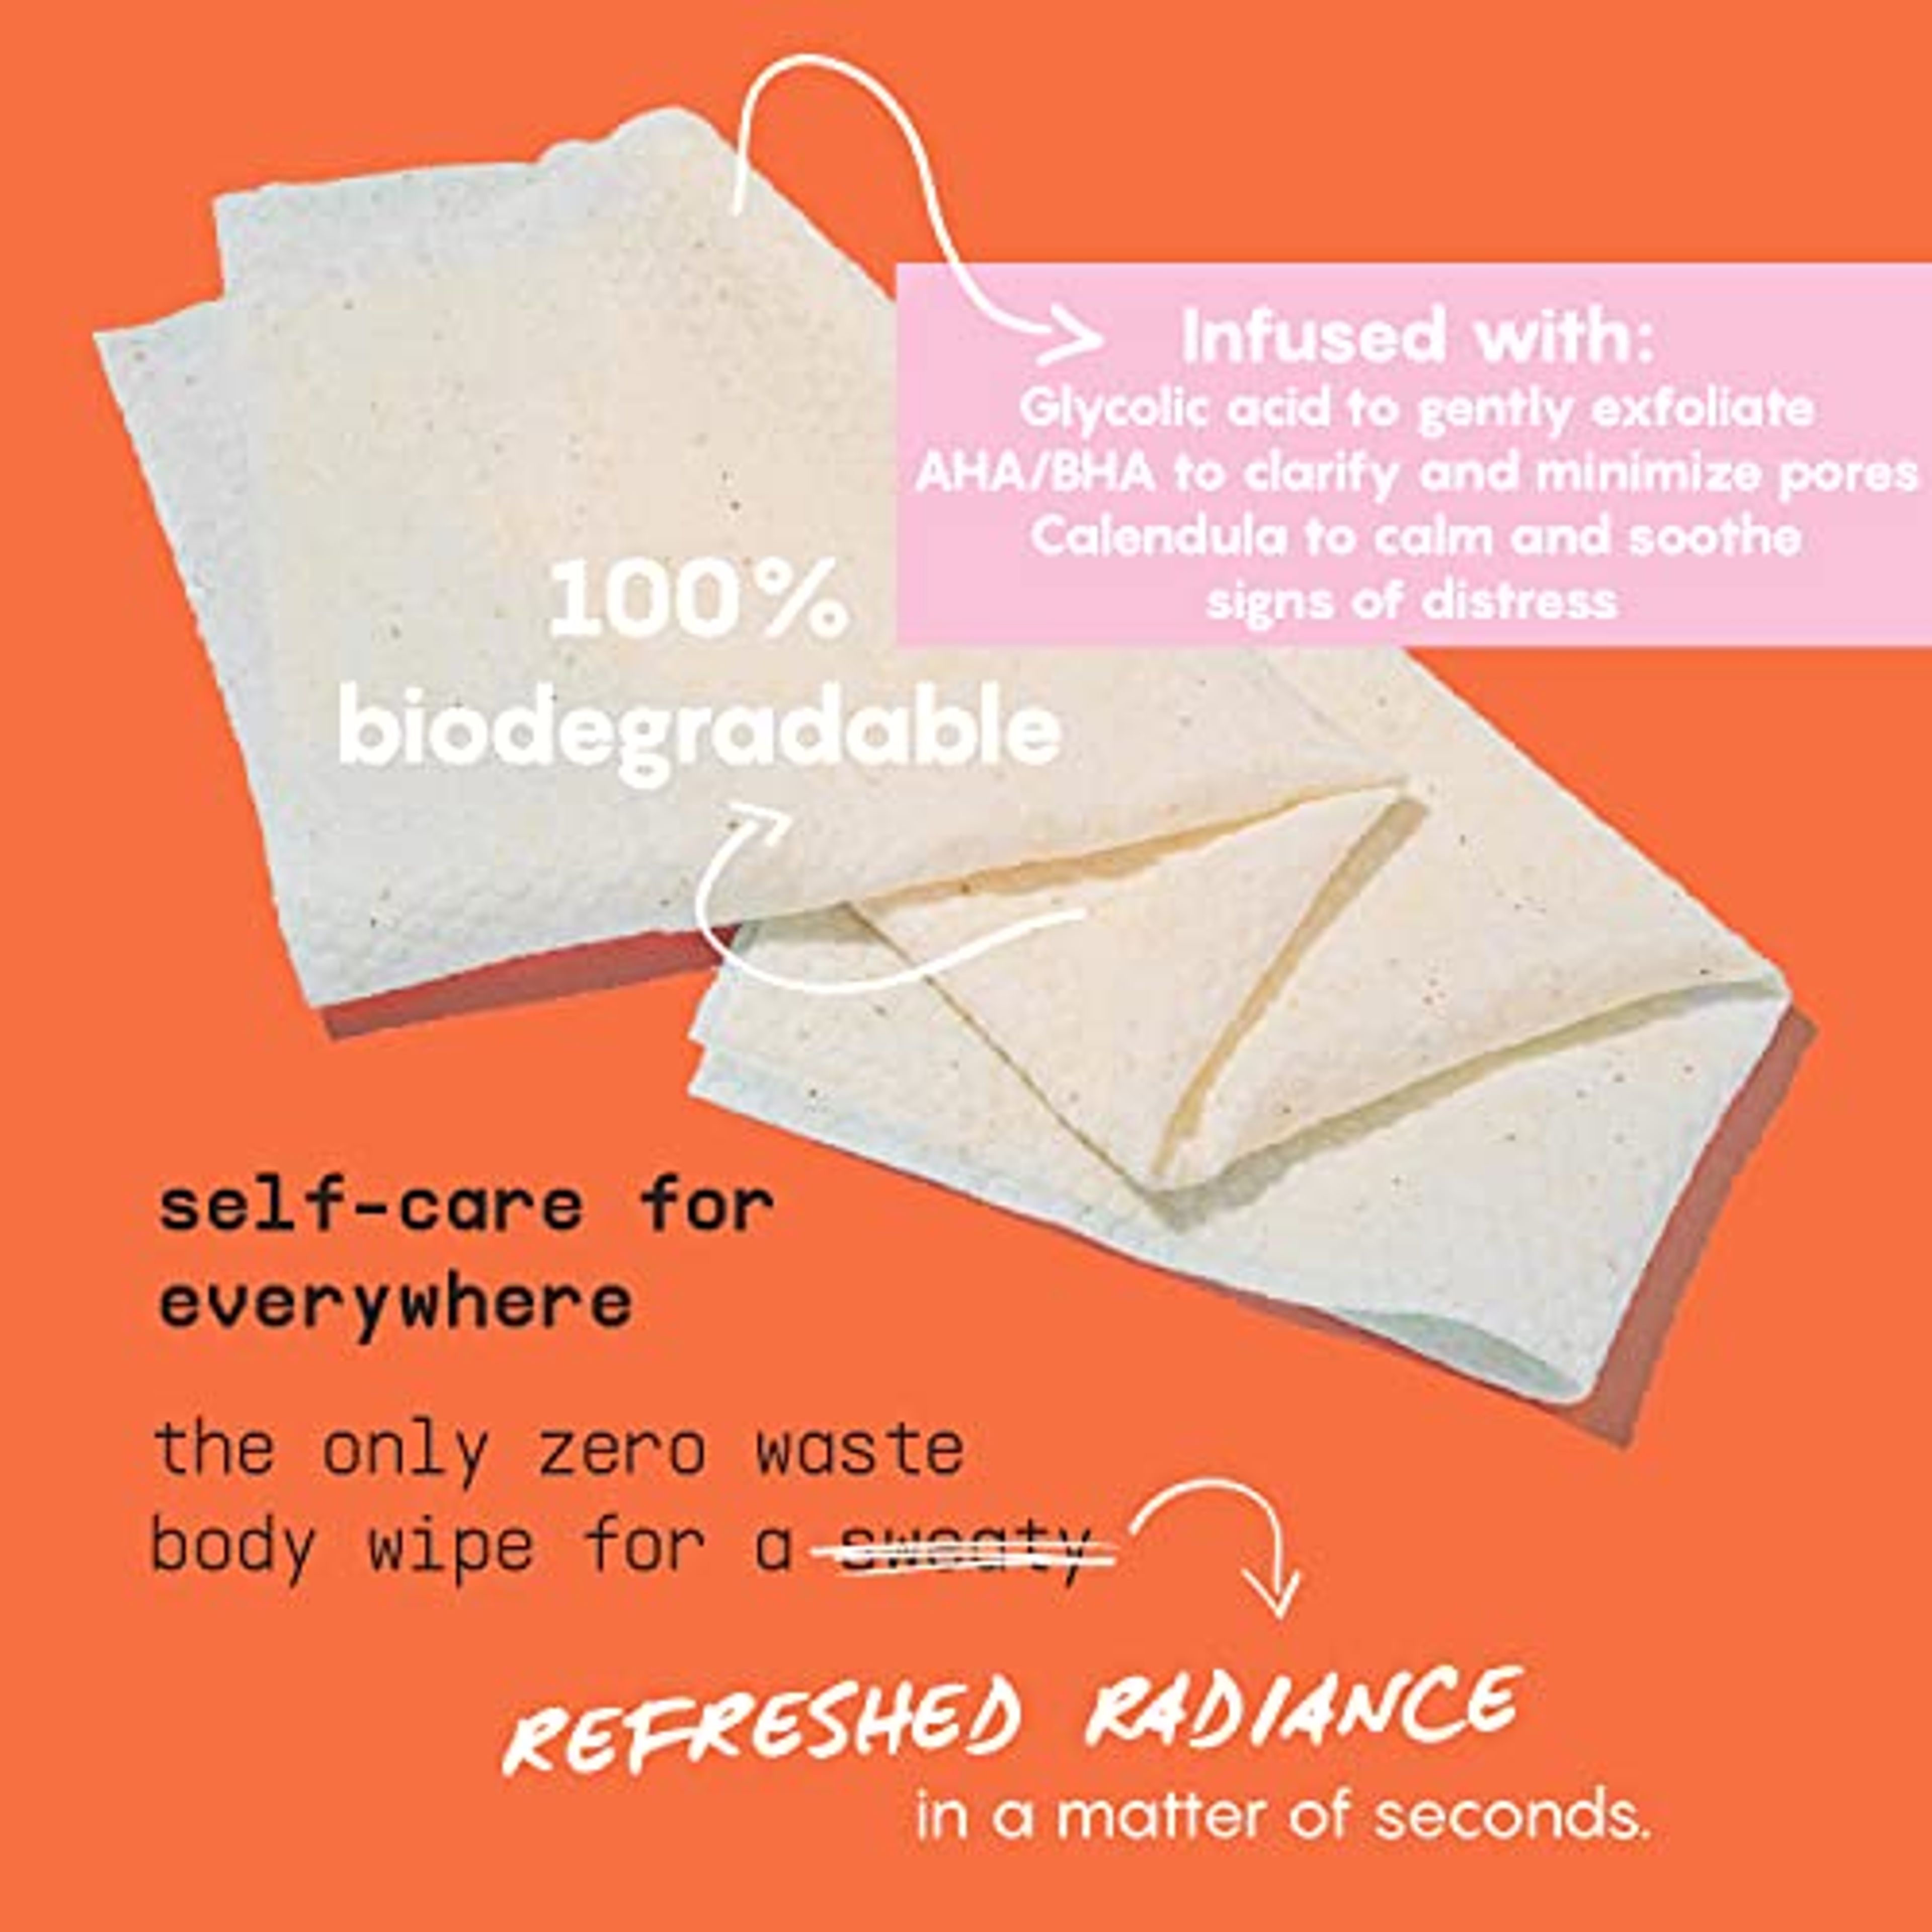 Refresh Line Facial Wipes - Clarifying Cleaning Wipes, Fresh Citrus Moist Towelettes Individually Wrapped - Natural Wipes & Face Wash Cloth for Facial Cleansing w AHA/BHA, Clover & Calendula, 15ct